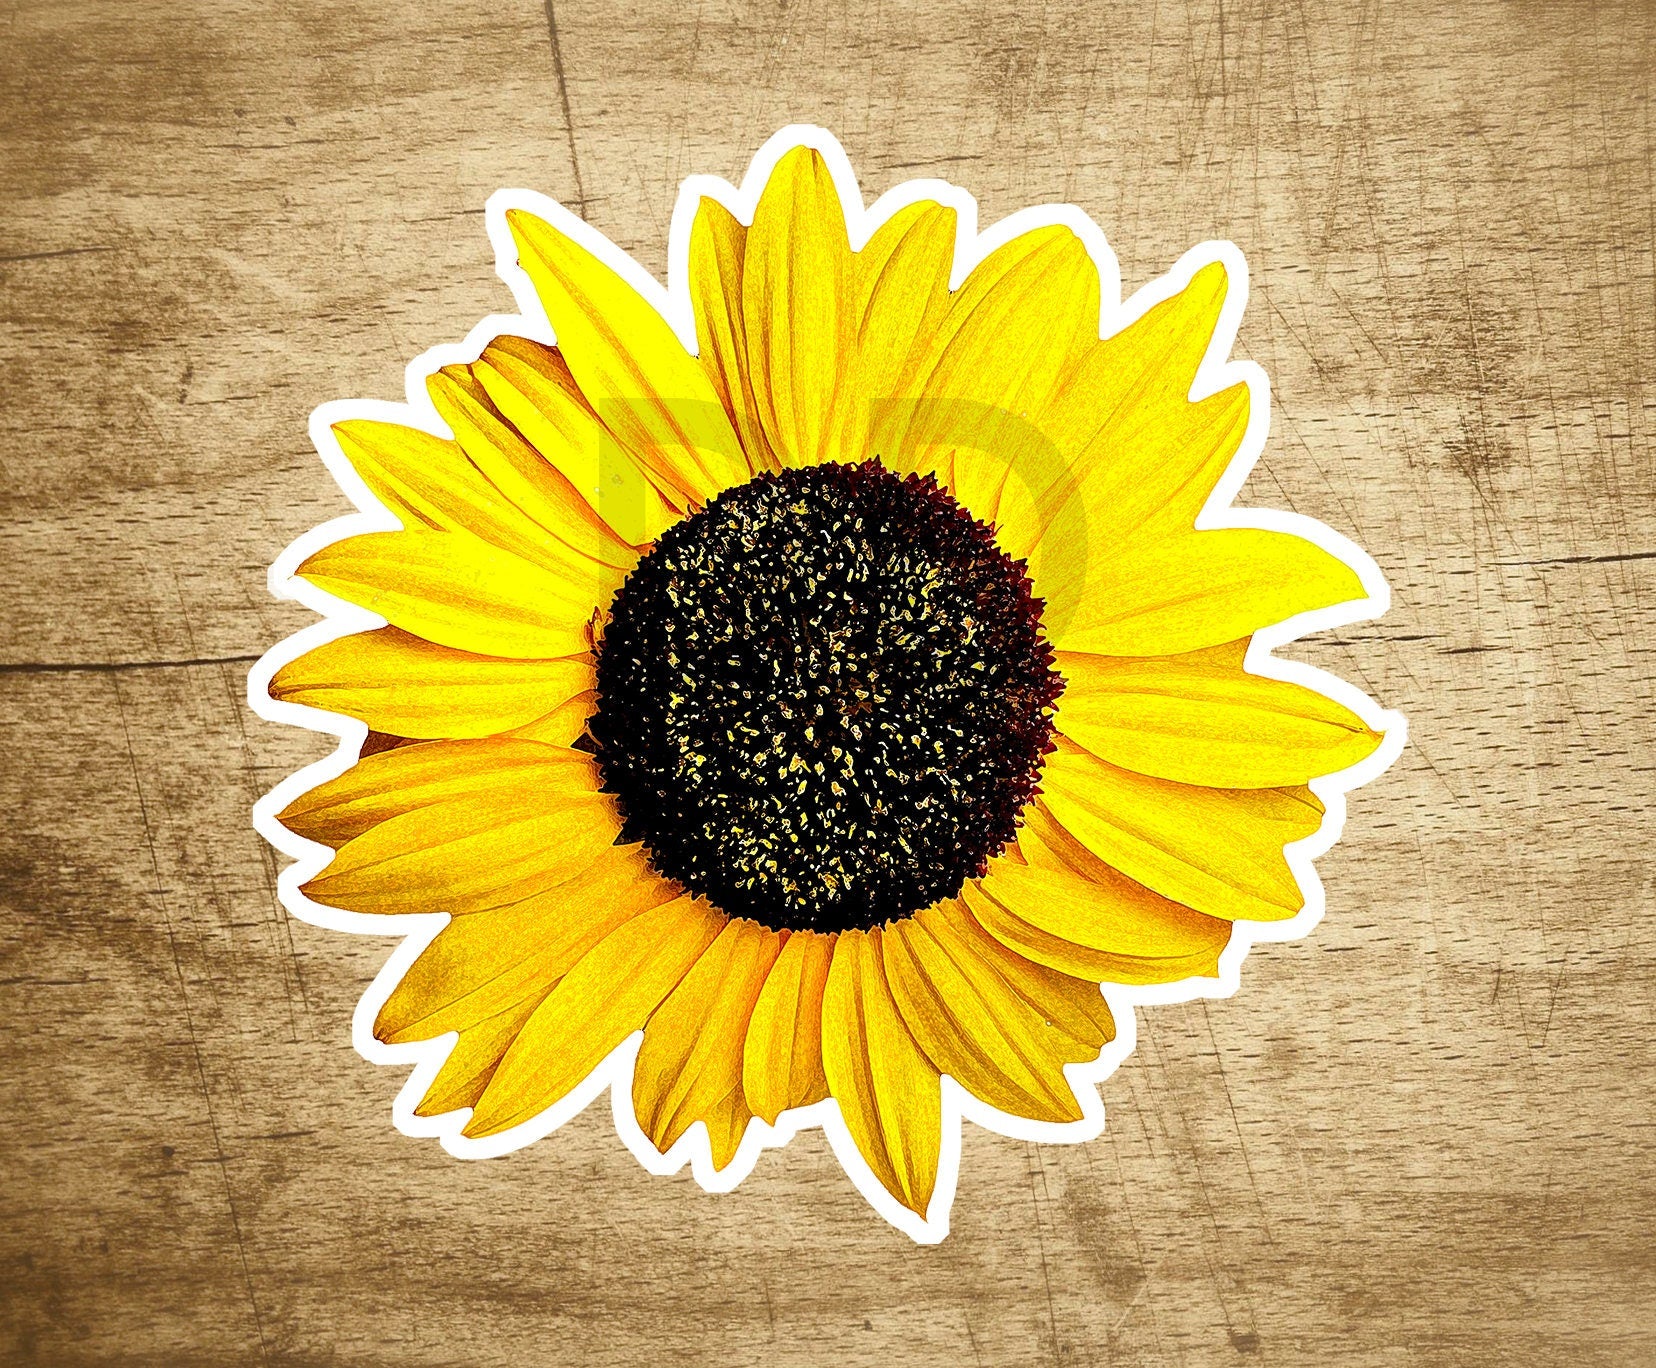 Daisy Yellow Cute Colorful Flower Sticker Flowers Decal 3.3" X 3.2" Hippie